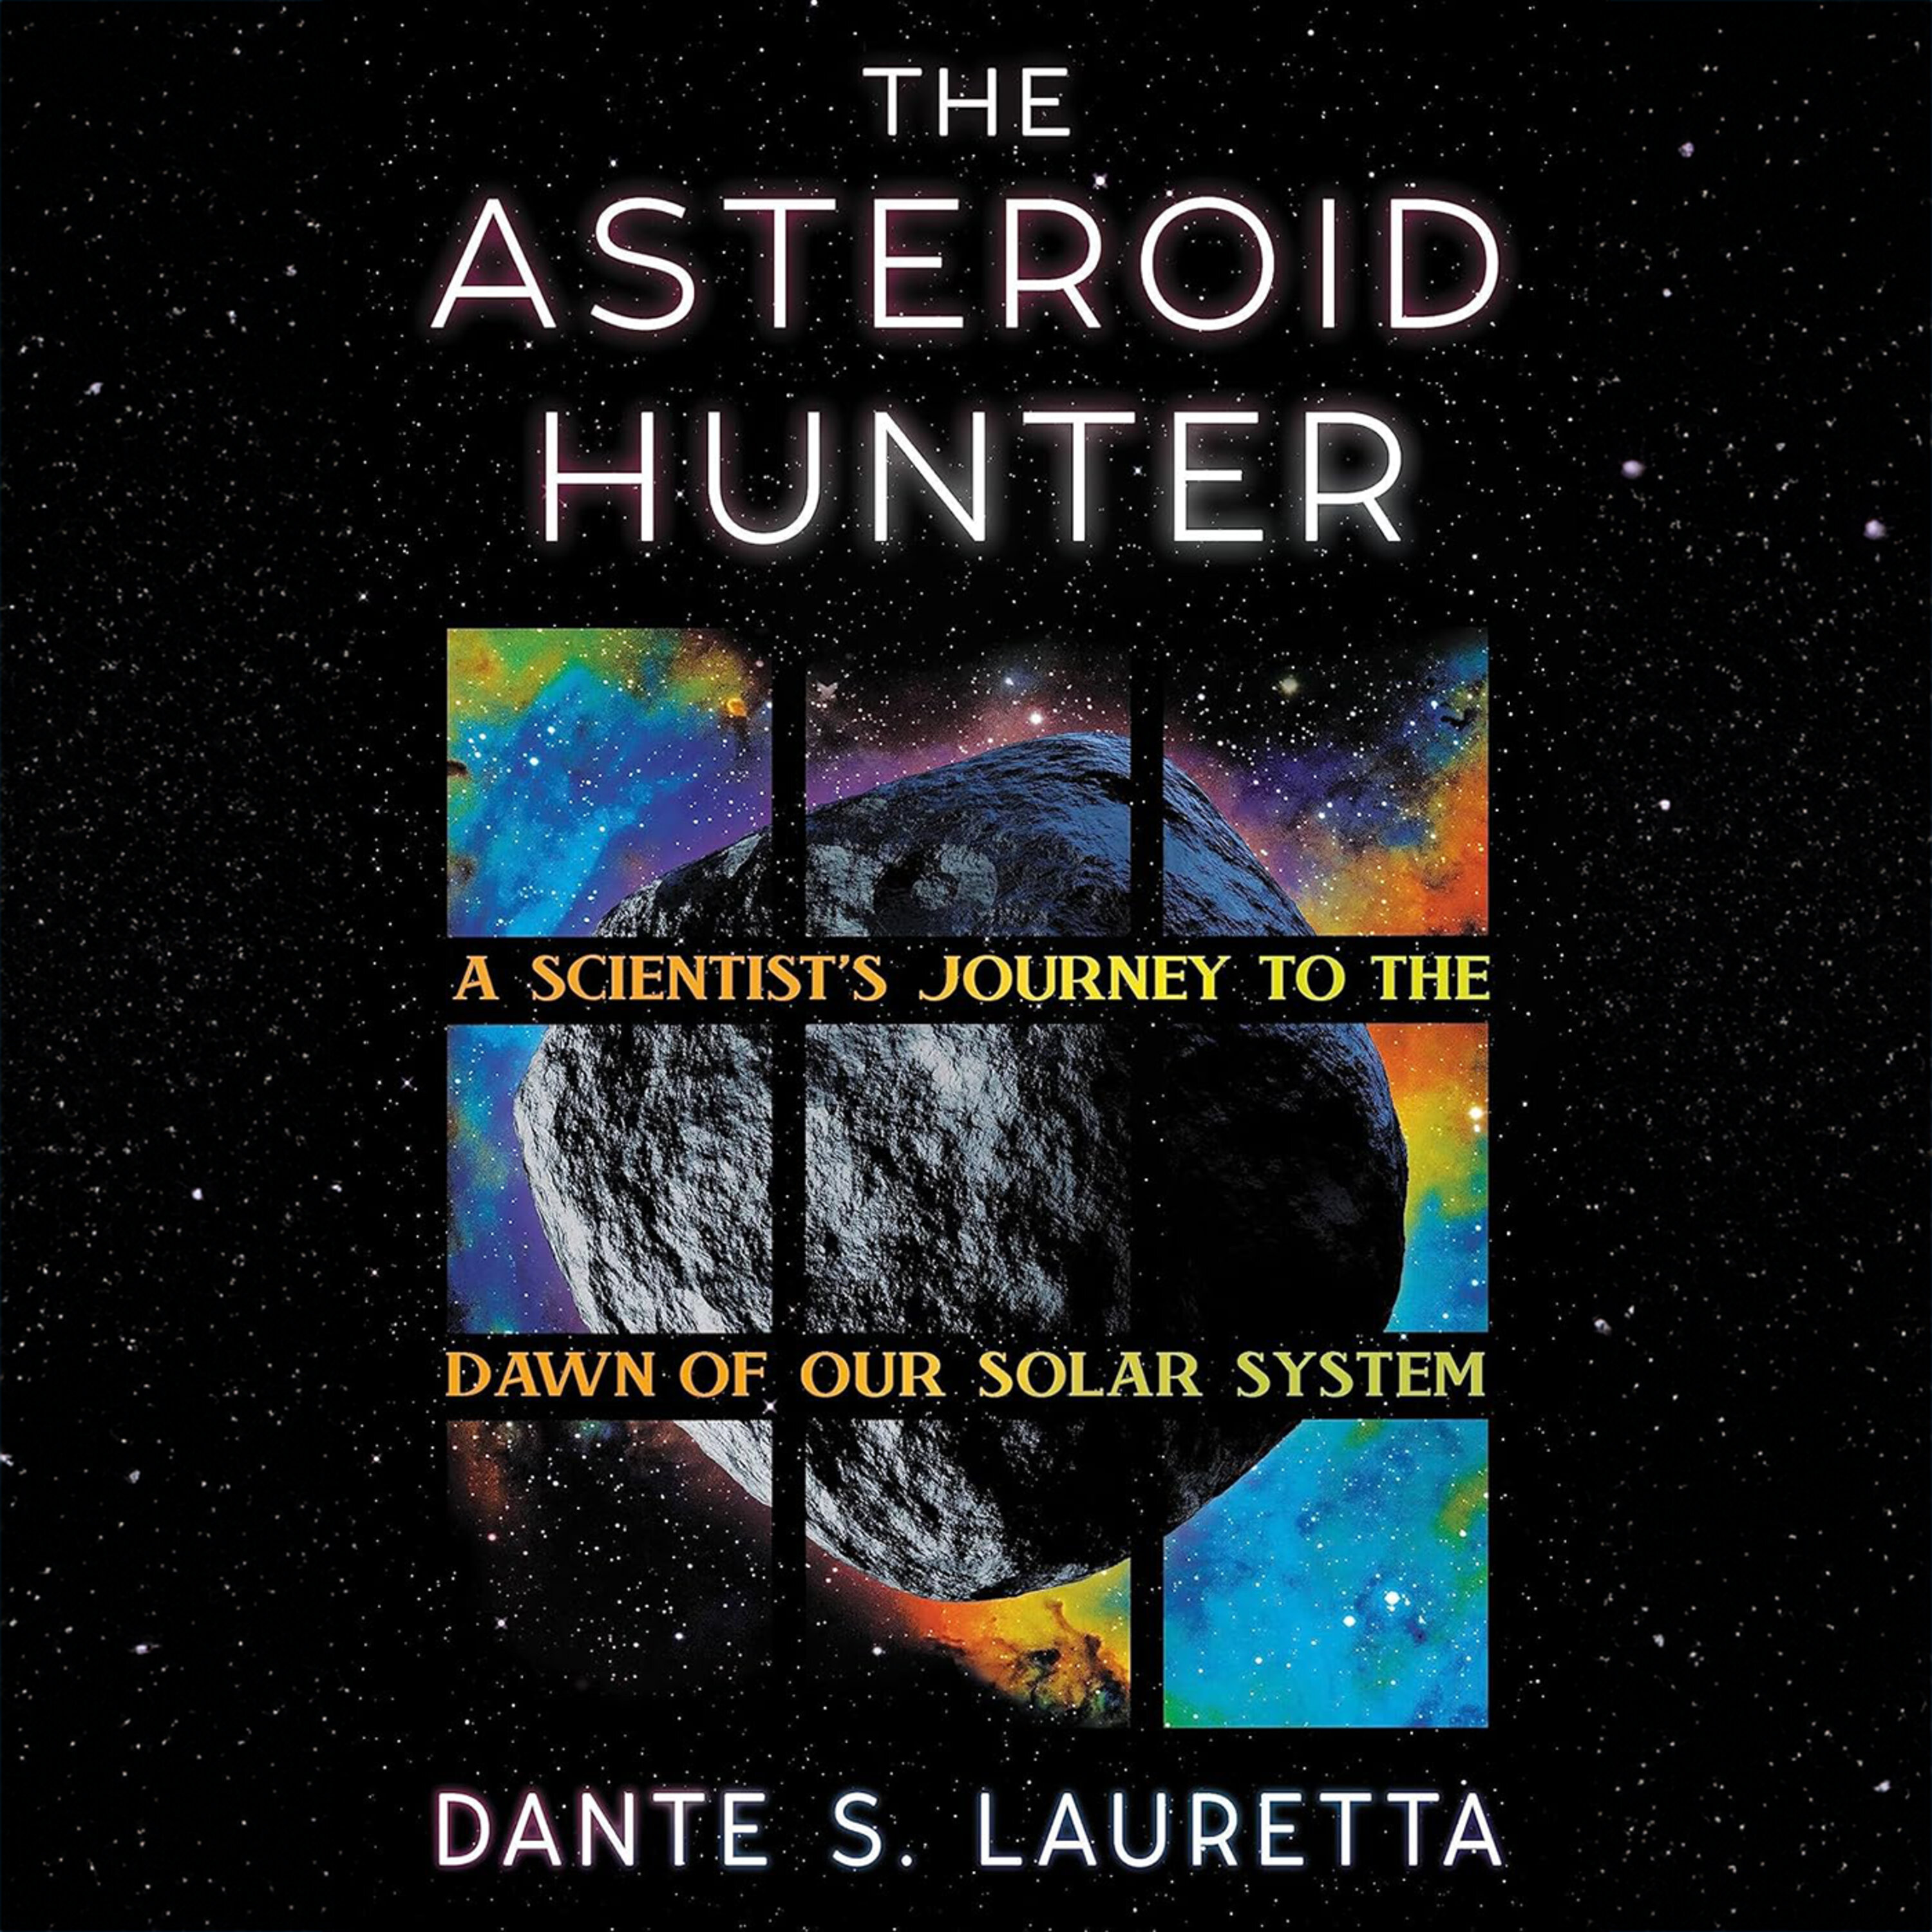 The asteroid hunter